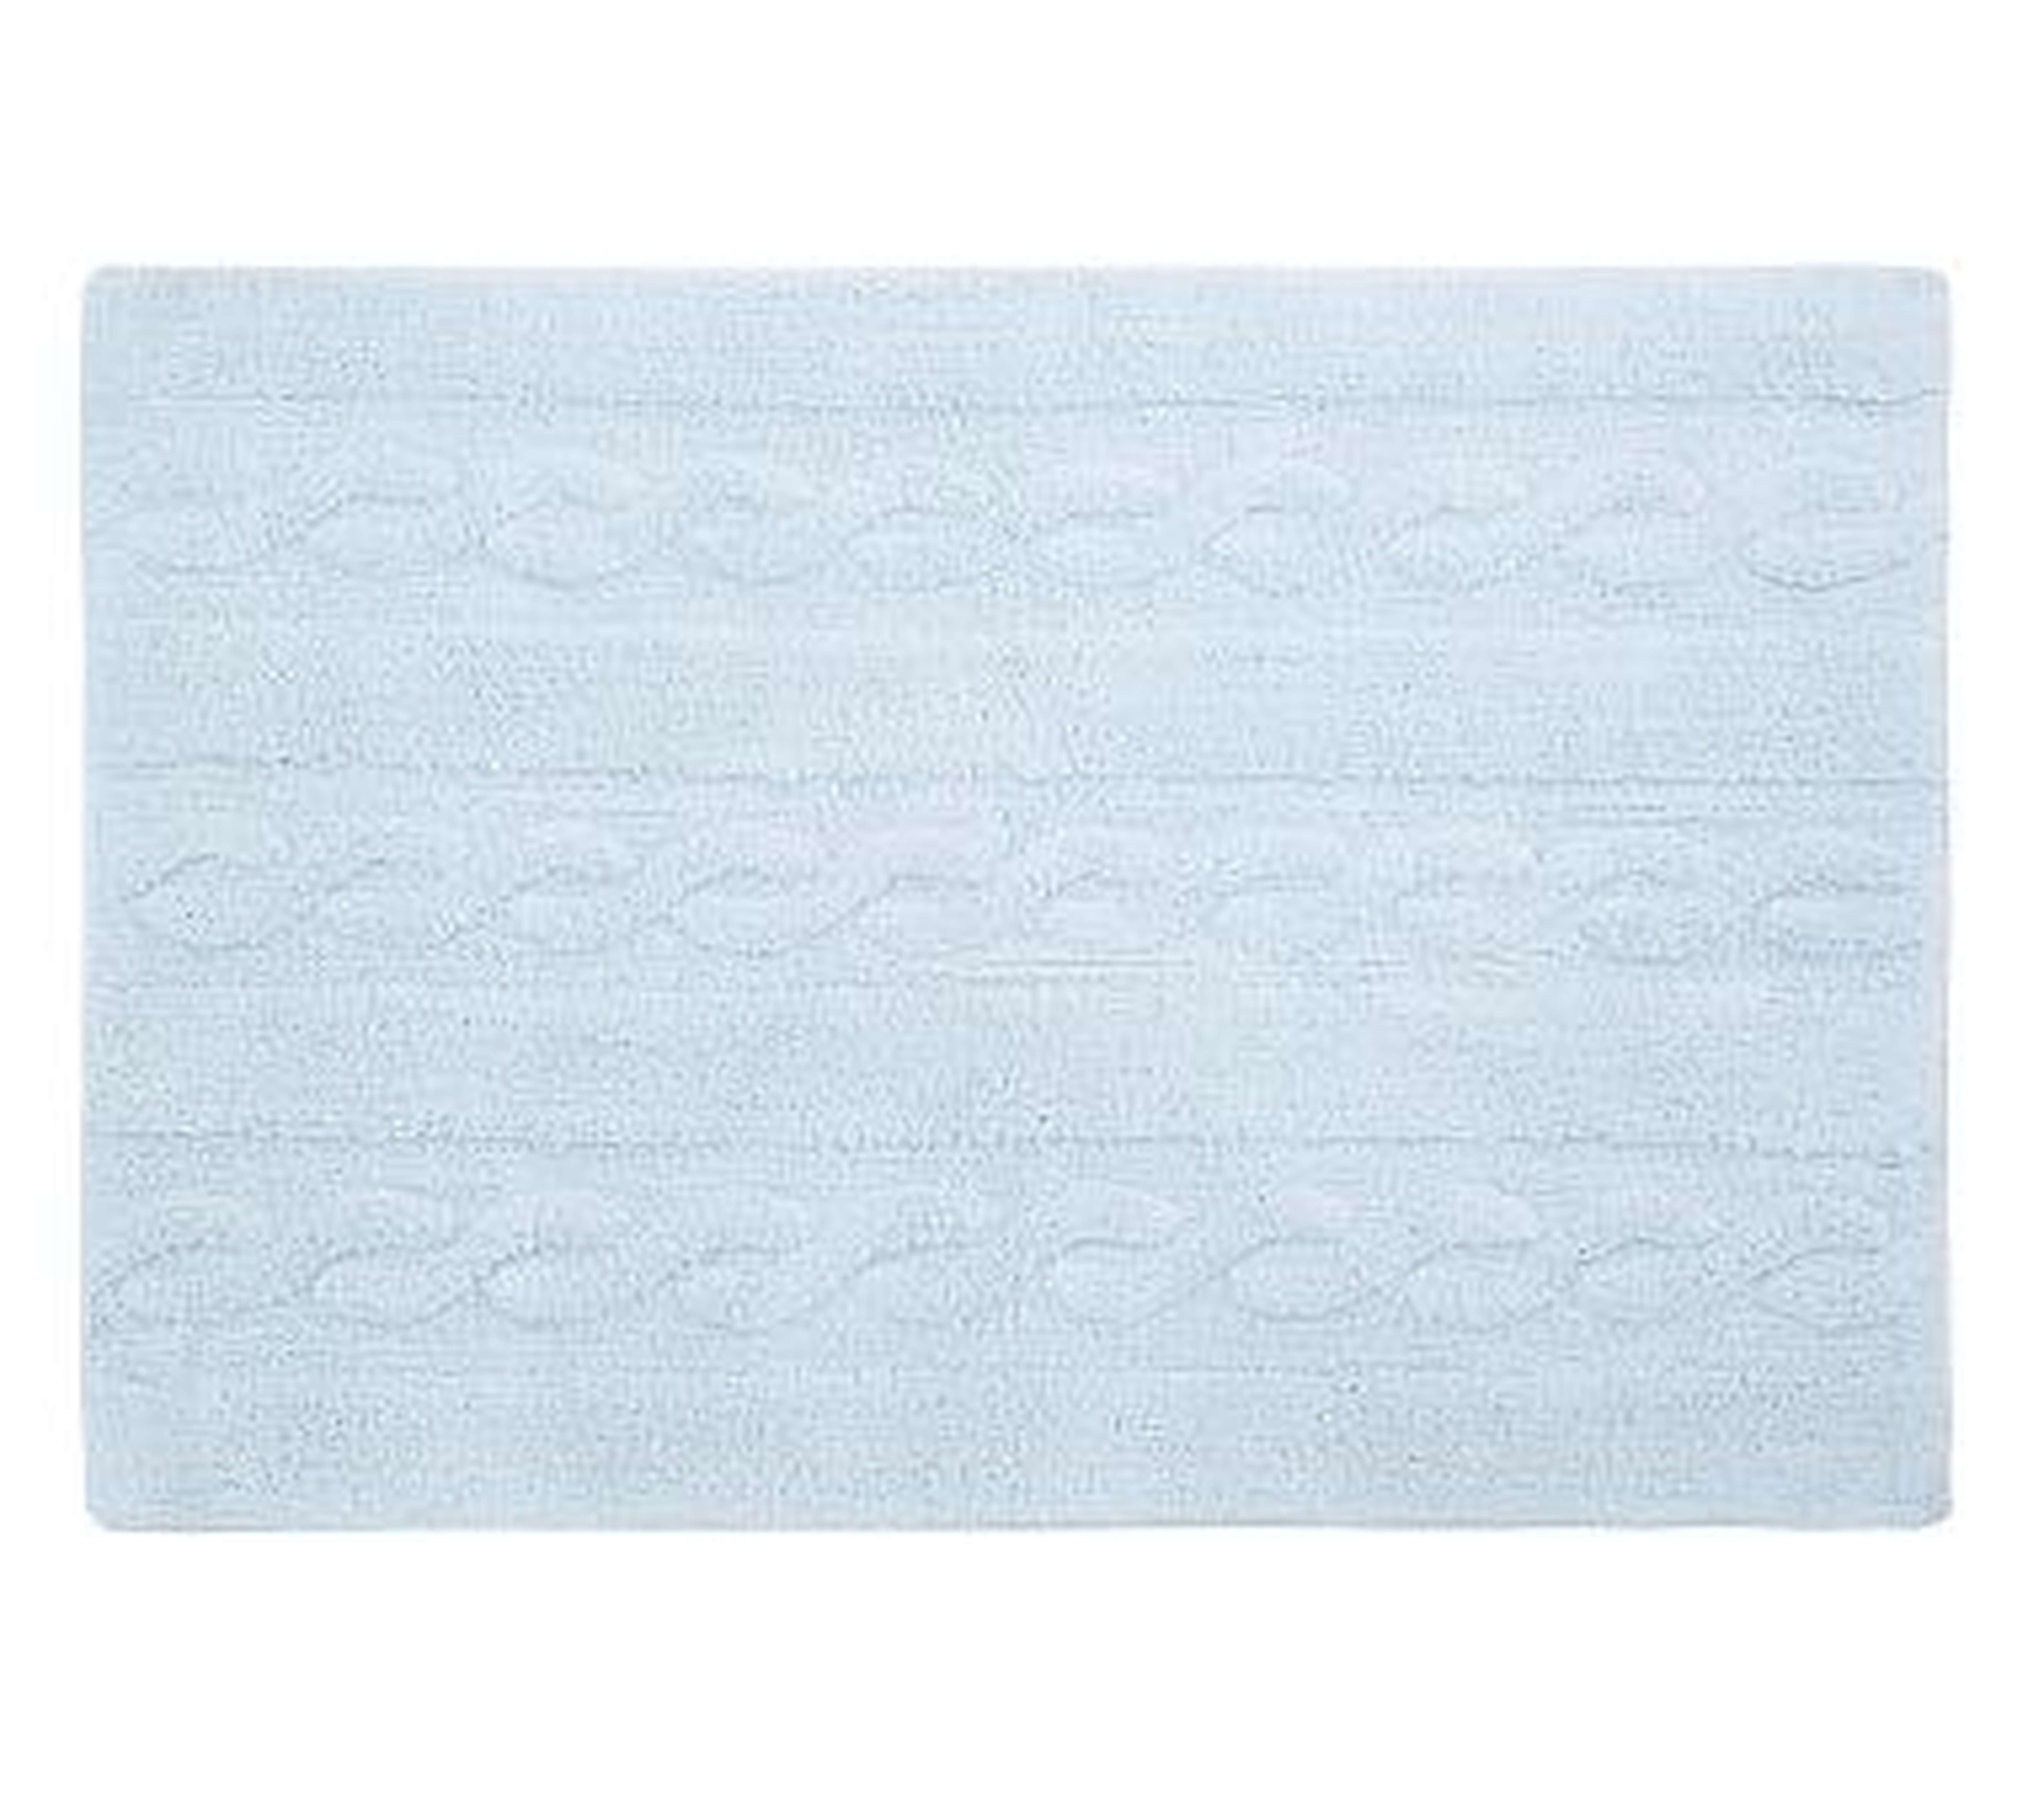 Lorena Canals Braids Washable Rug Soft Blue Small 2' 6" x 4' - Pottery Barn Kids